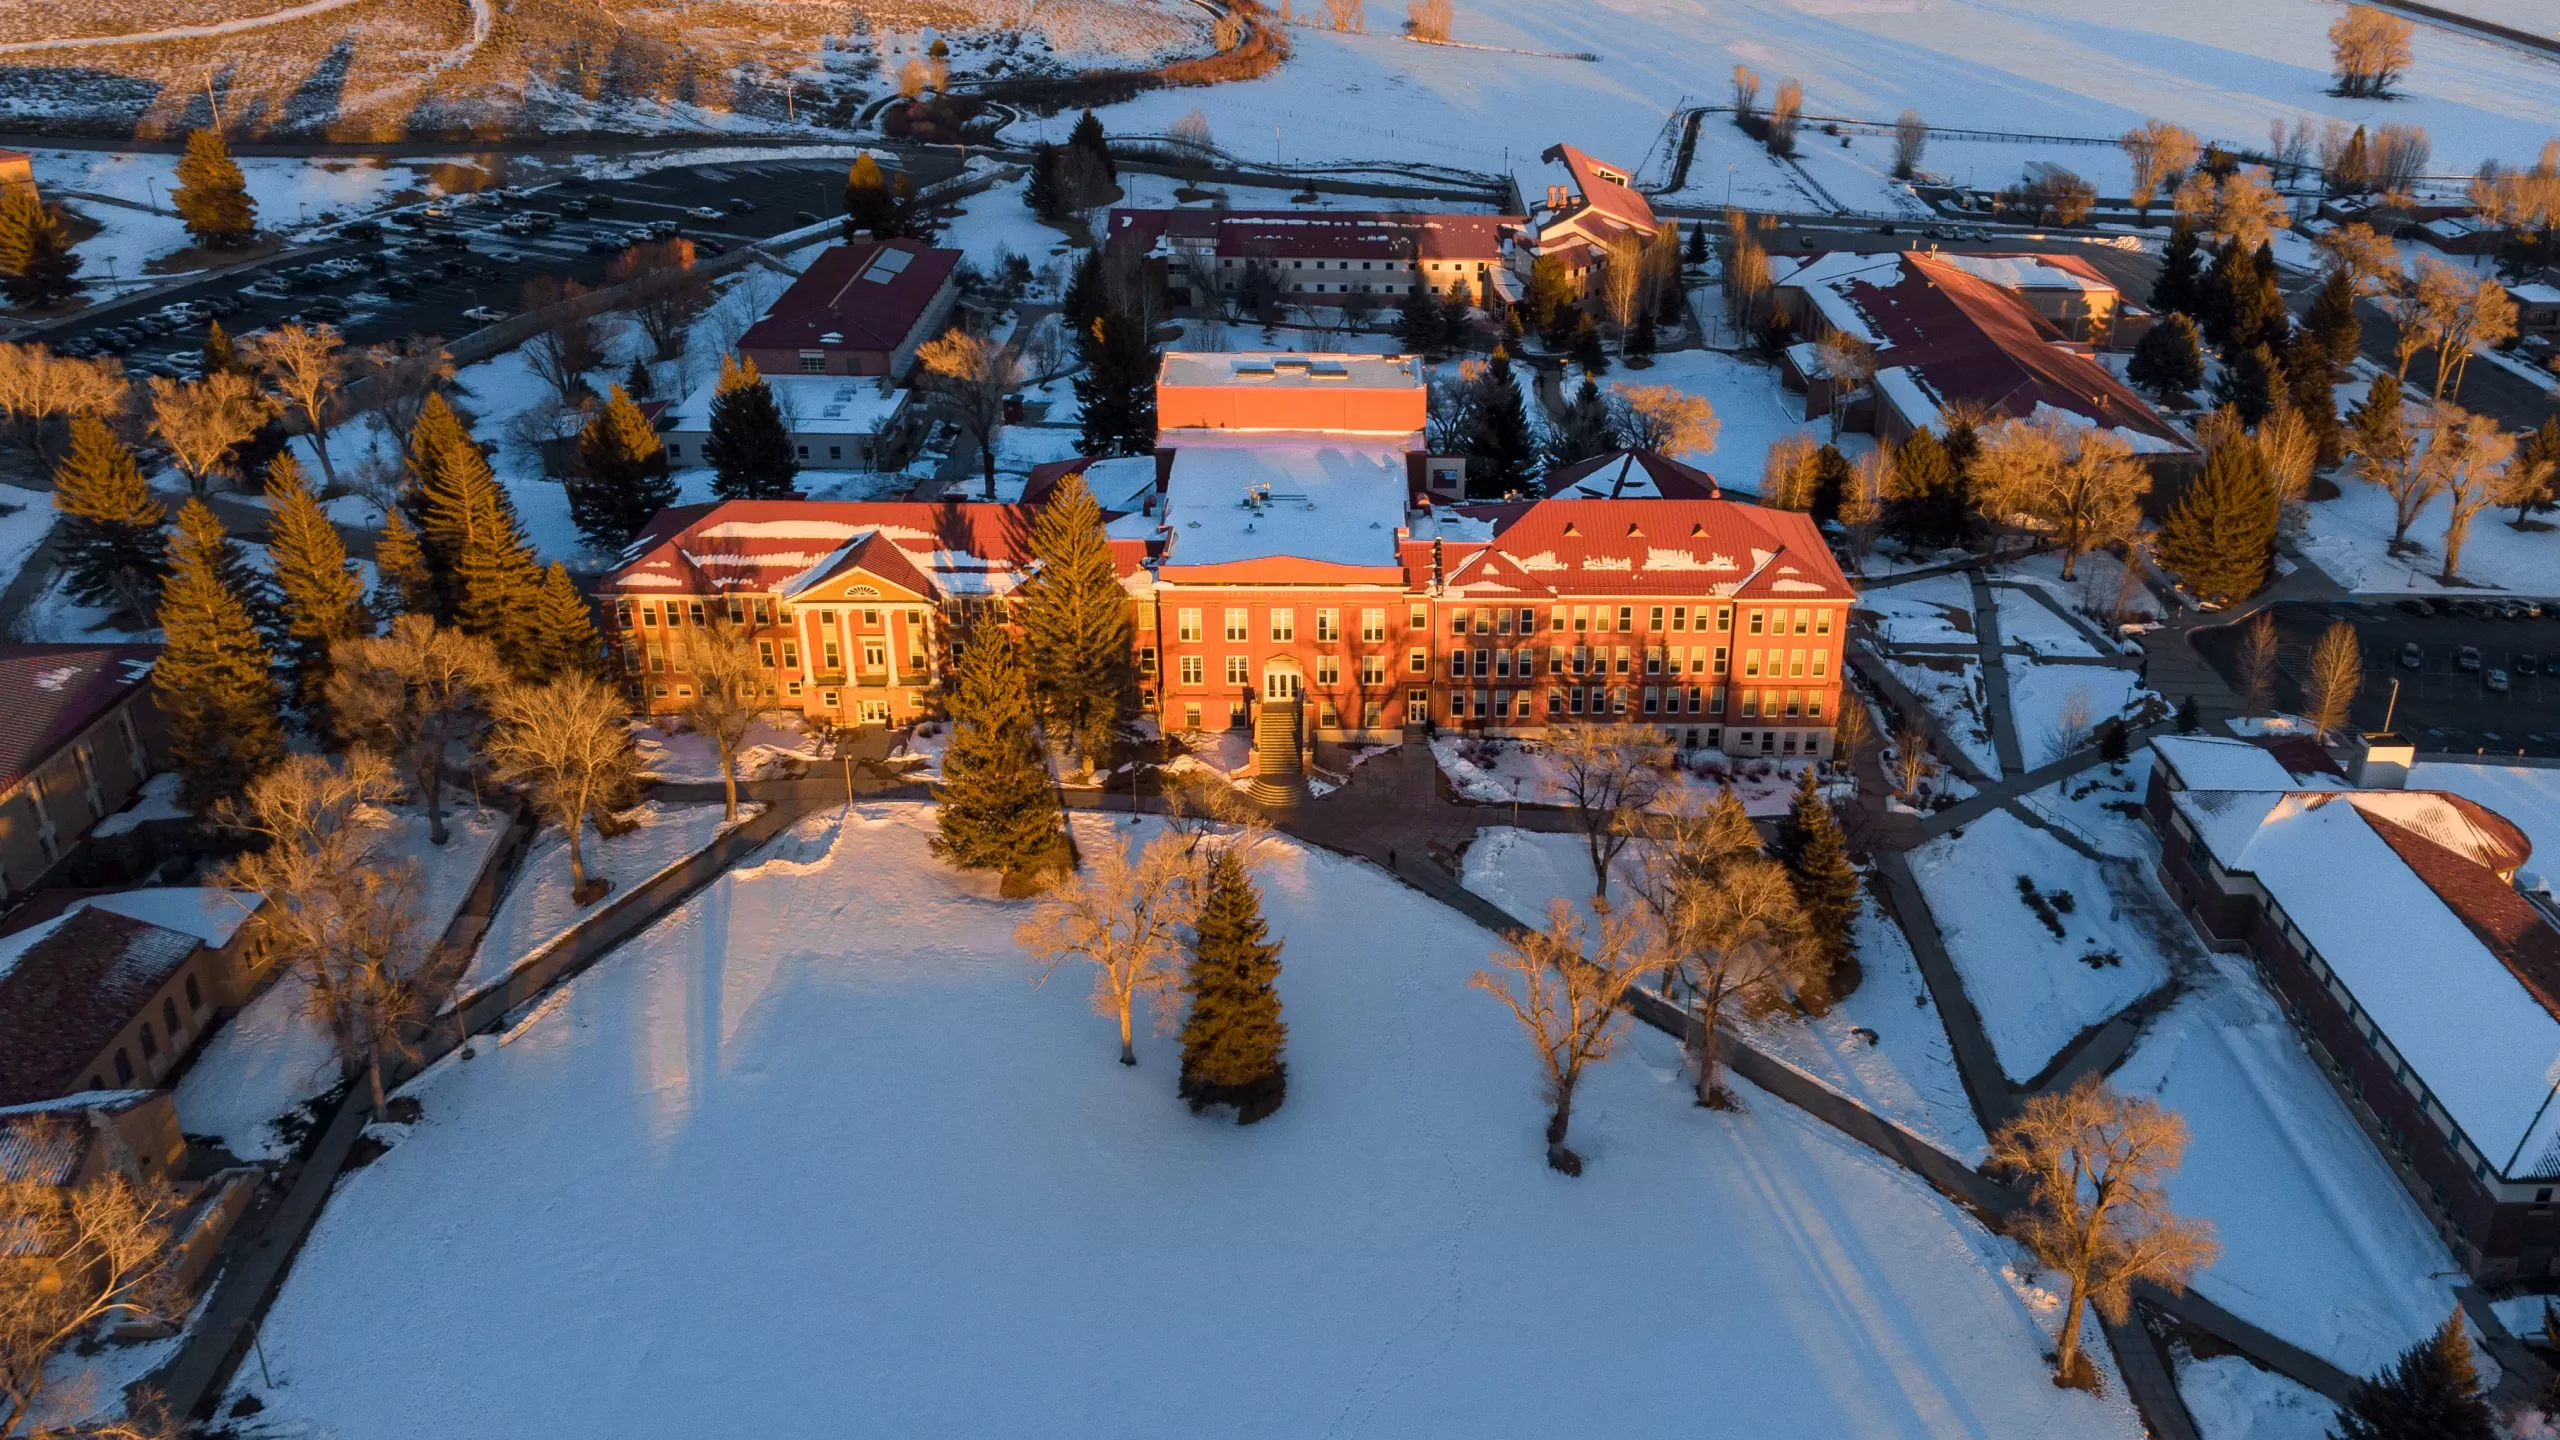 The sun sets on Taylor Hall at Western Colorado University in winter.